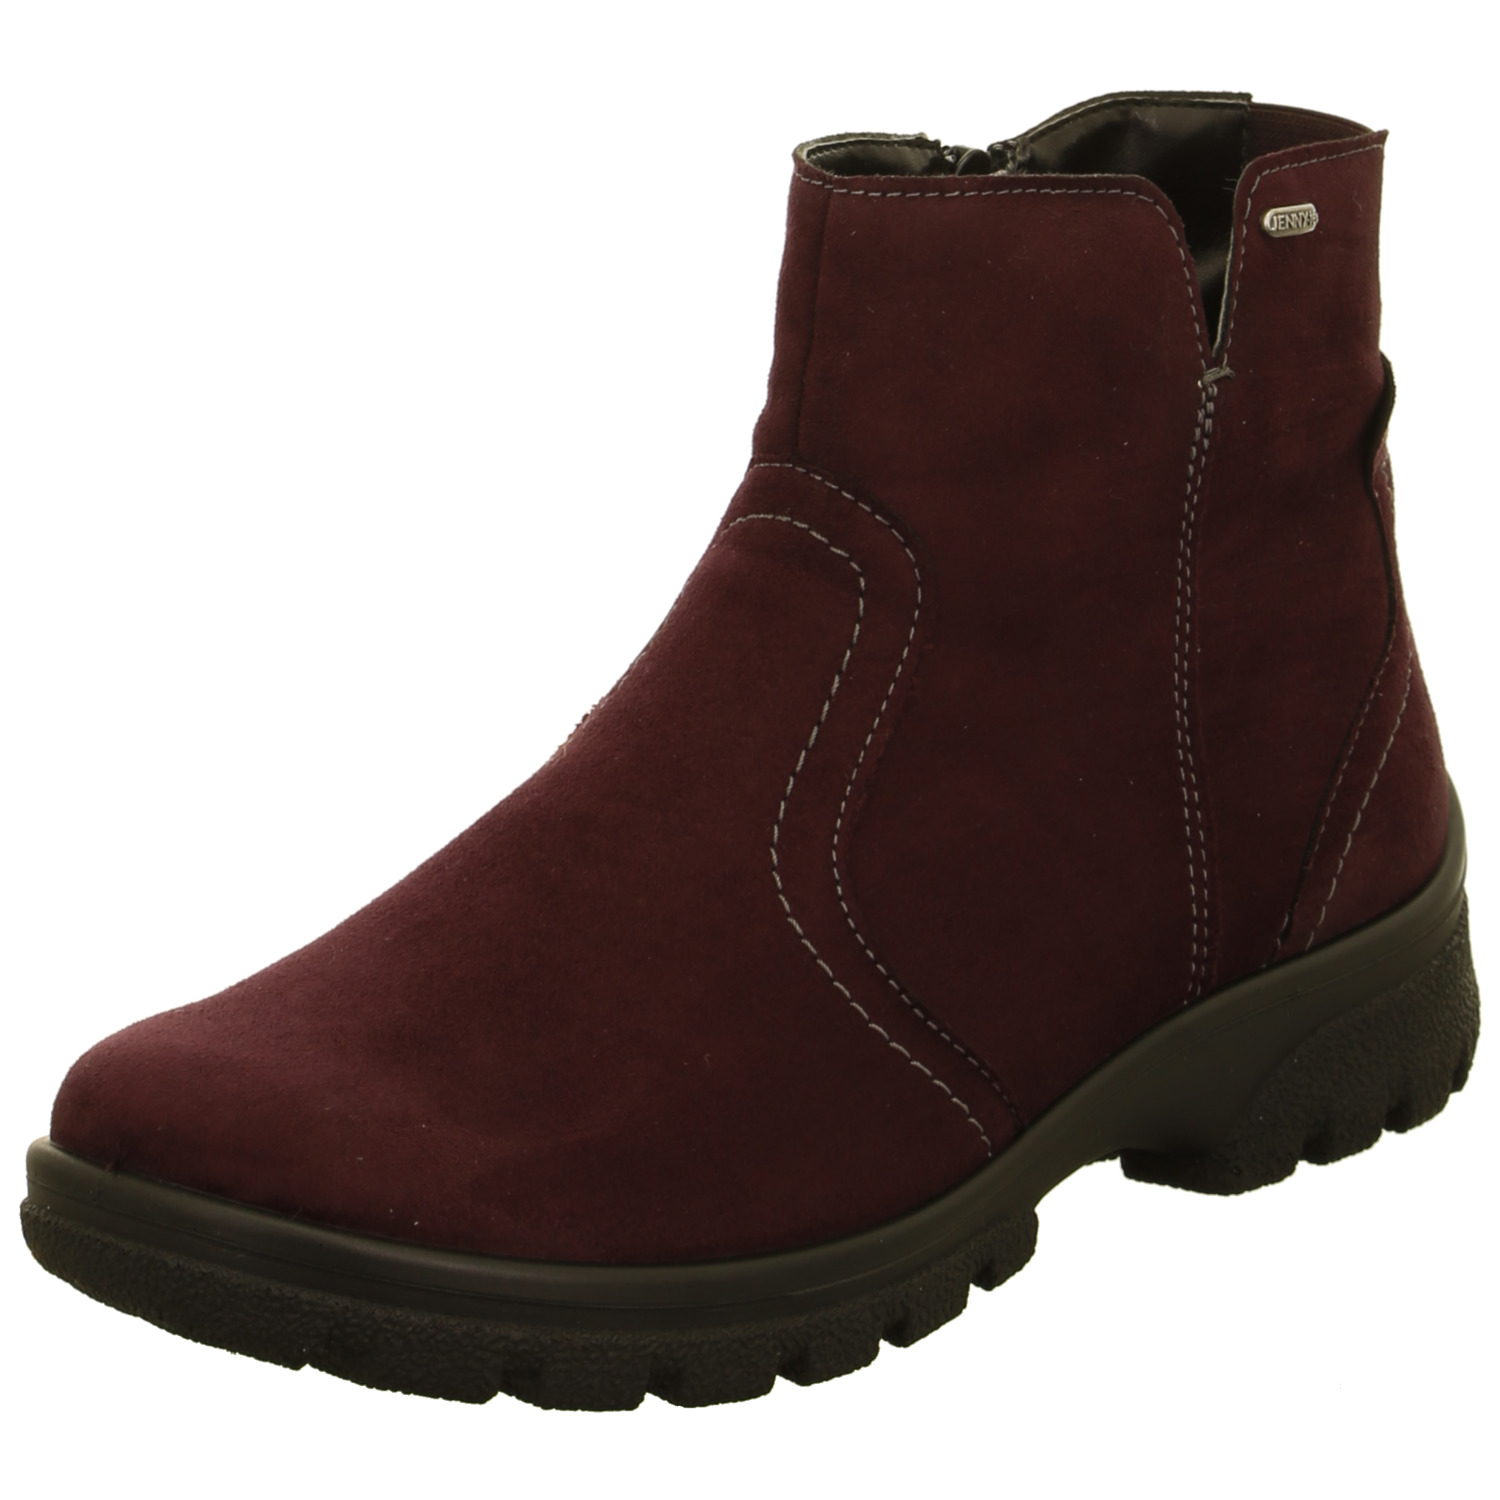 Boot - Brown Leather